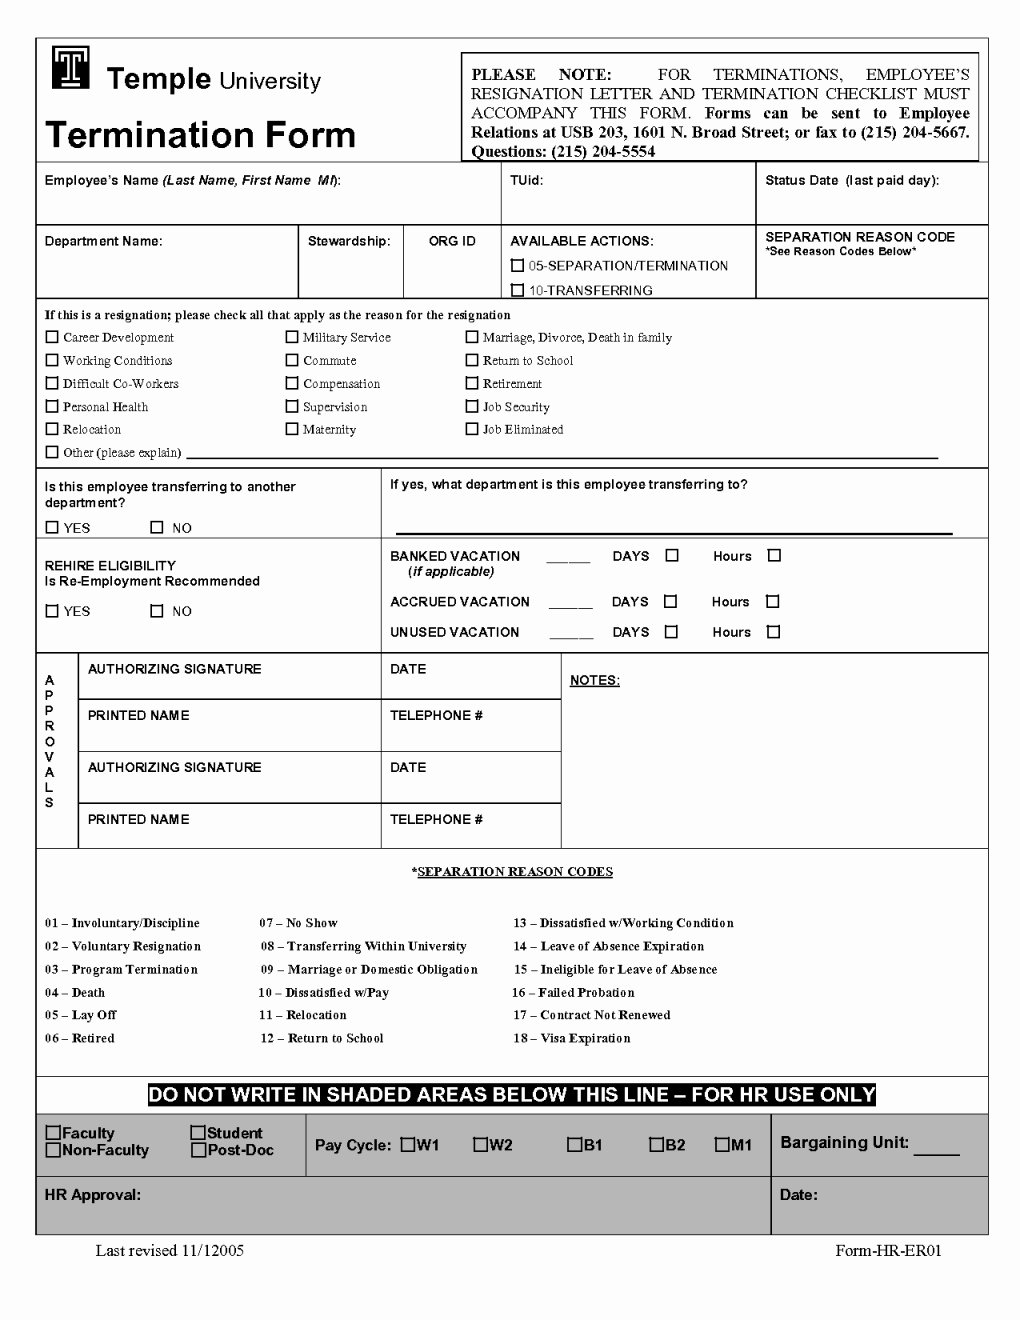 Employee Separation form Template Fresh Employee Separation form